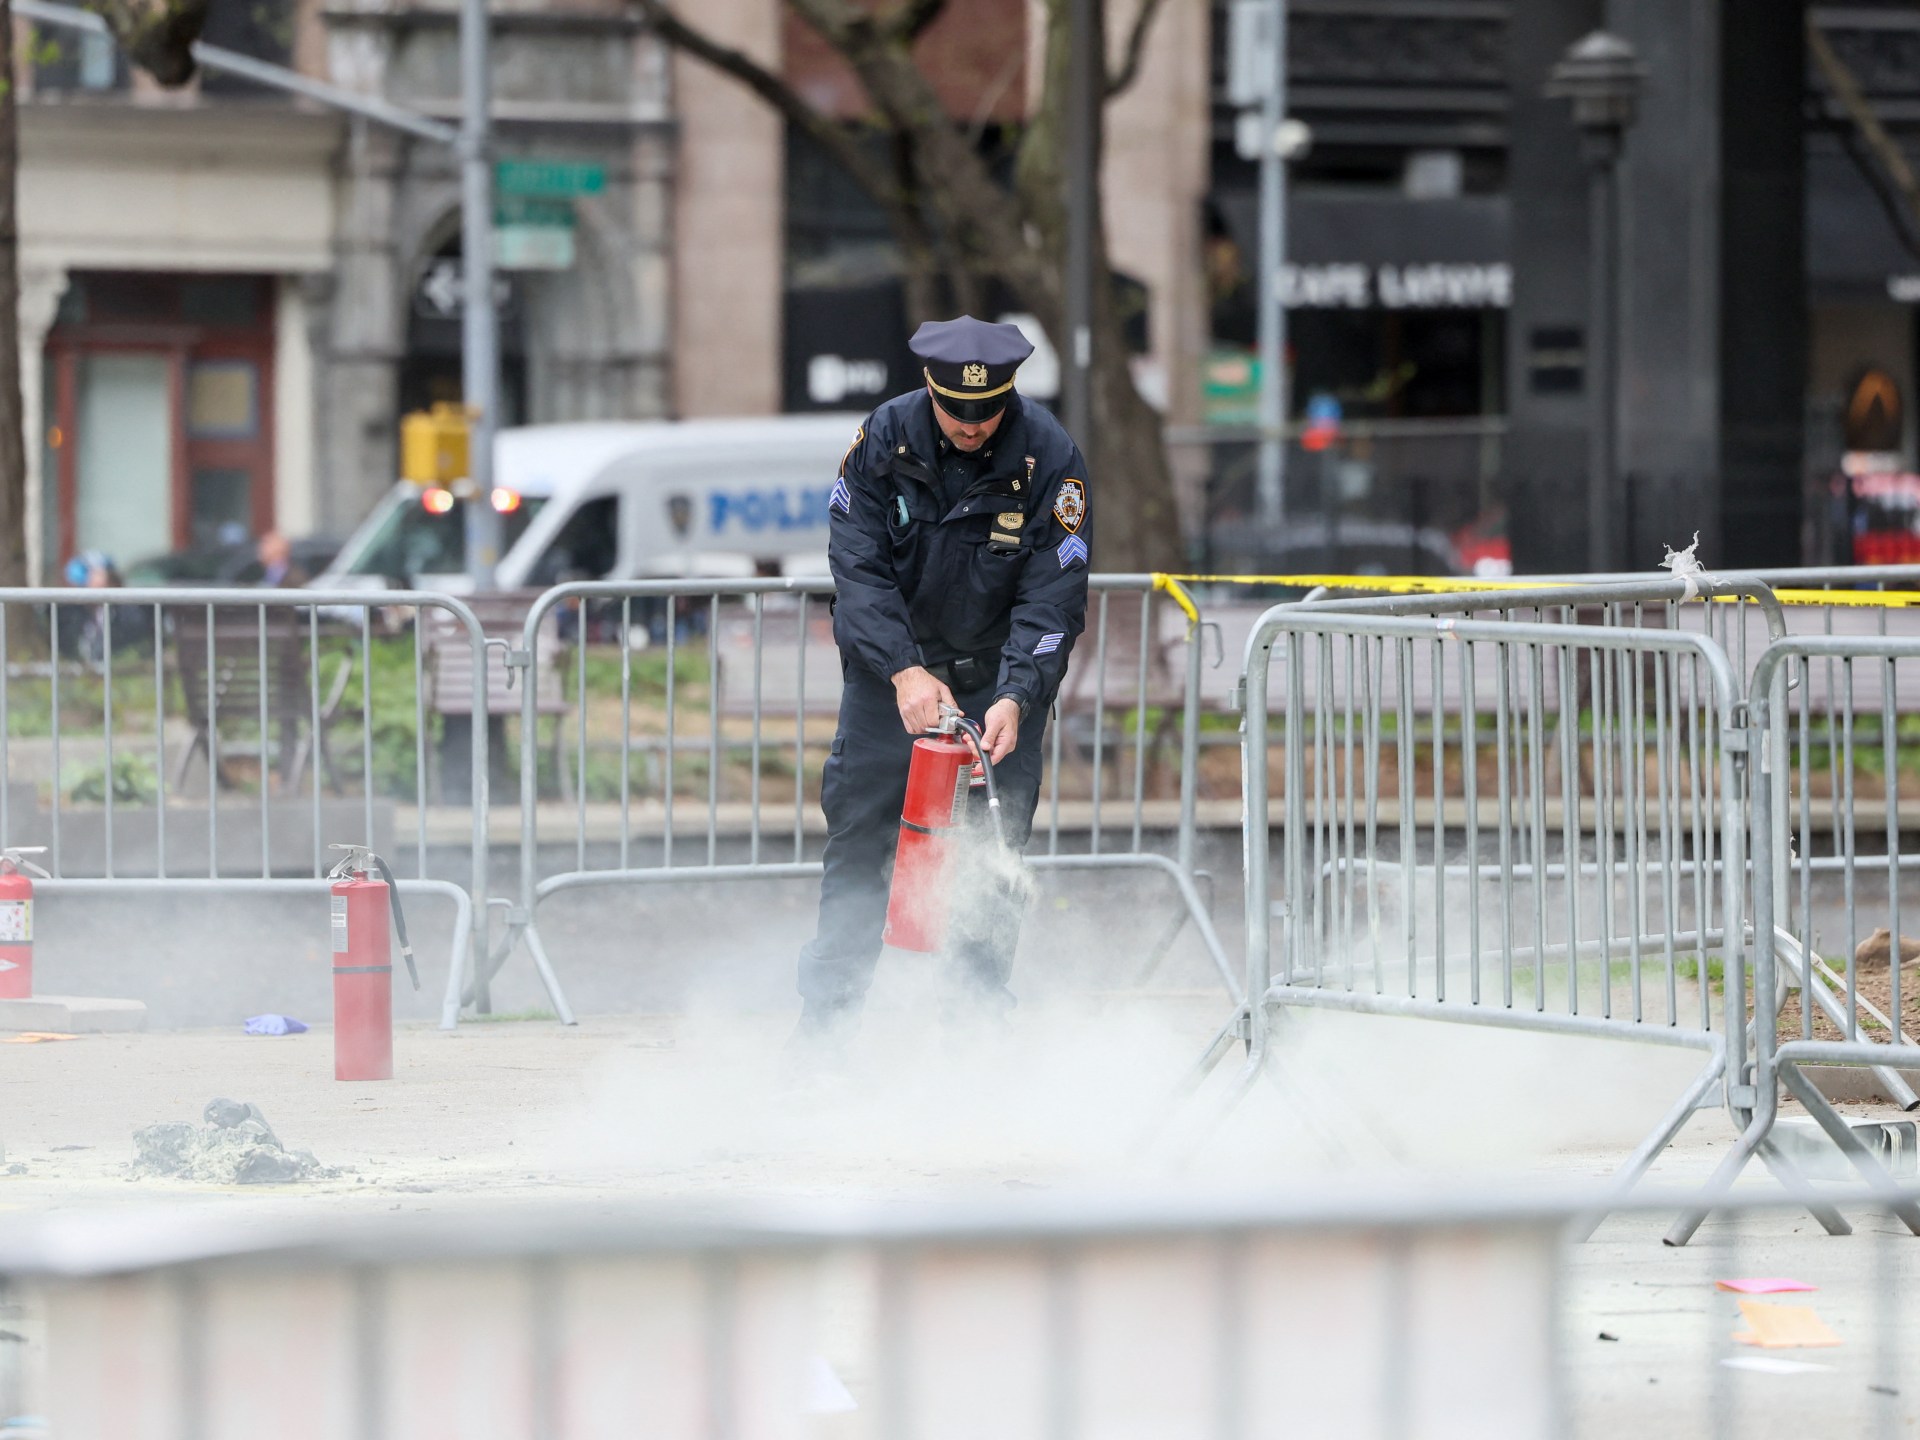 Man reportedly on fire outside of New York Trump trial